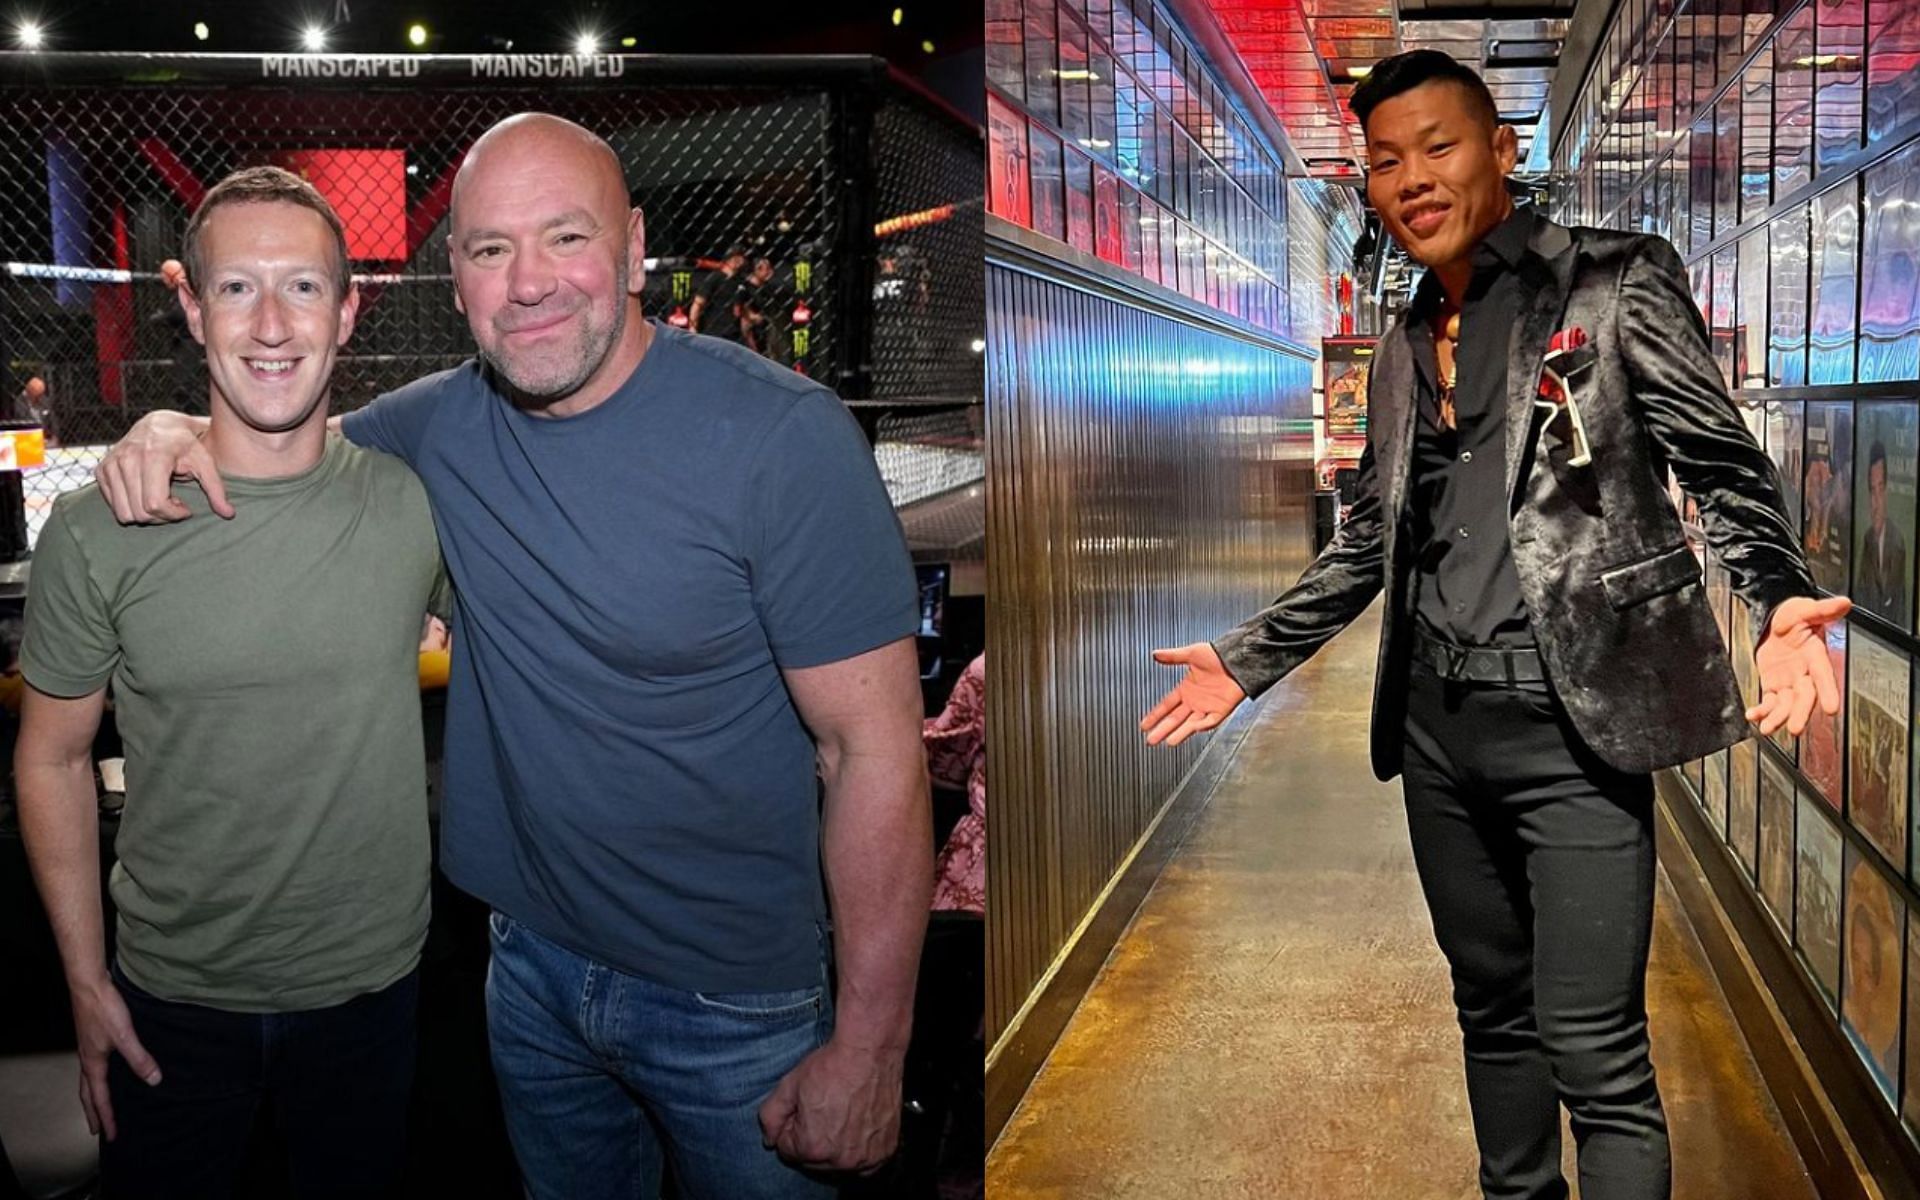 Mark Zuckerberg and Dana White at UFC Apex (left) and Li Jingliang in his suit (right)[Images courtesy: @ufc and @lijingliangmma on Instagram]